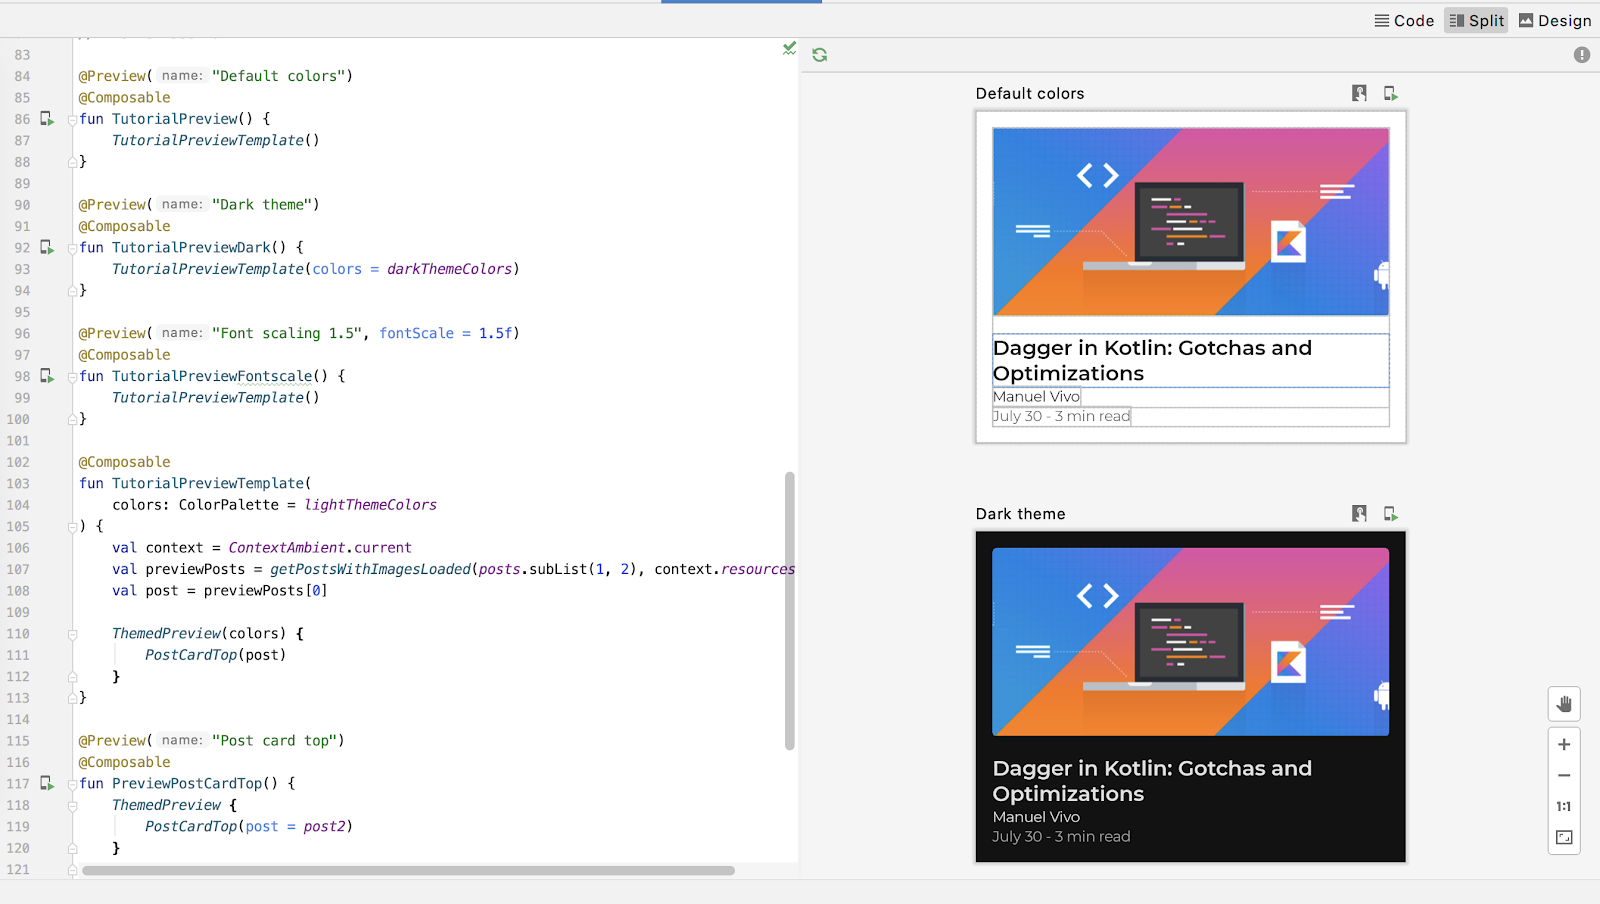 android studio preview